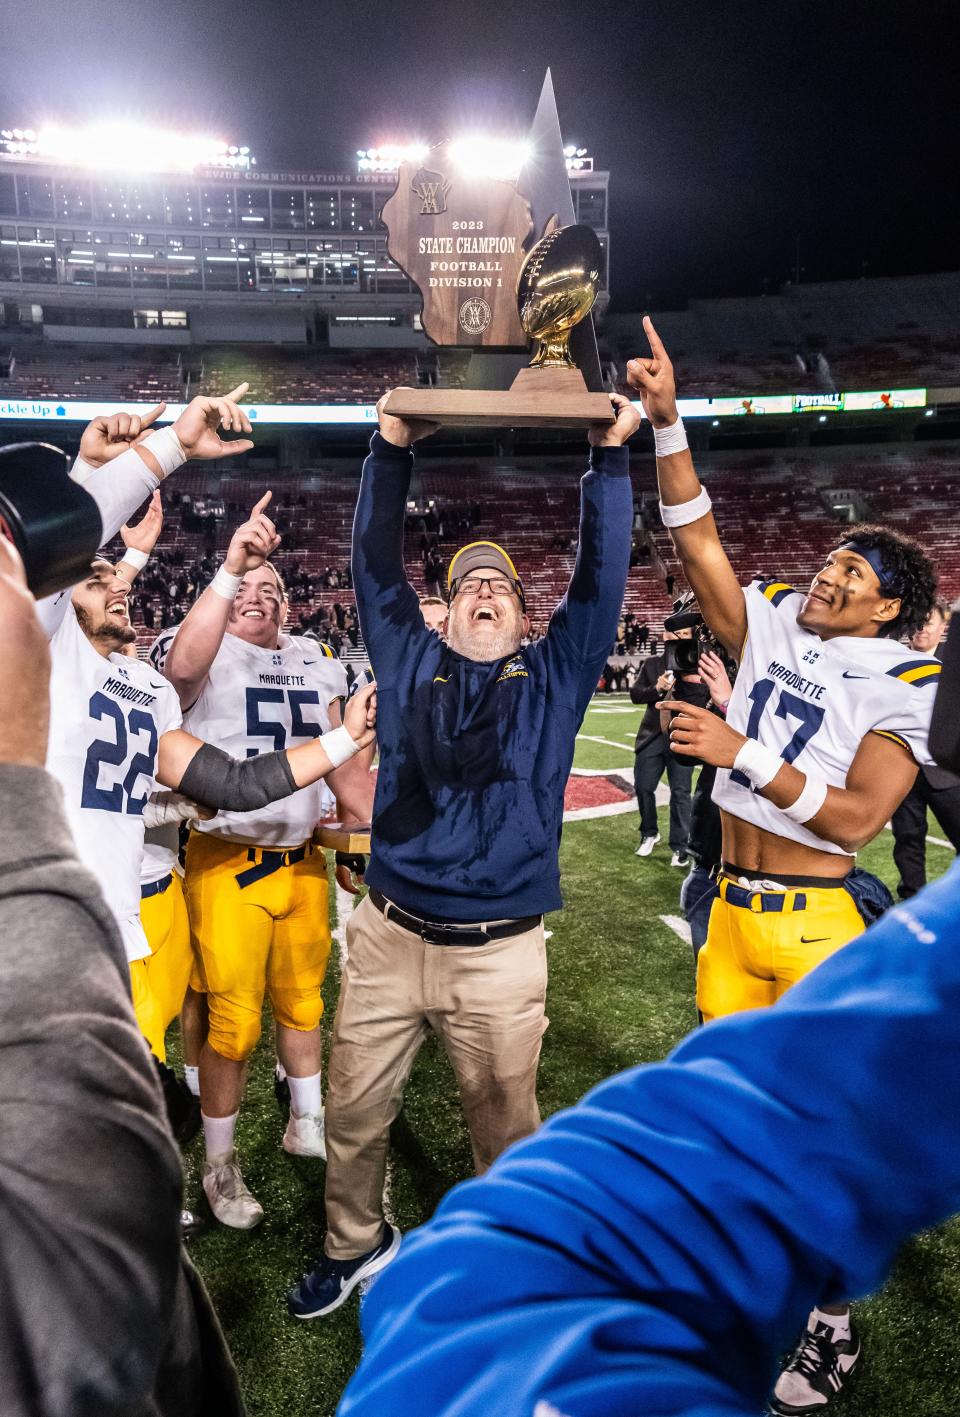 Marquette head football coach Keith Klestinski hoists the gold trophy after winning the WIAA Division 1 state championship, 27-10, over Franklin Friday at Camp Randall Stadium.